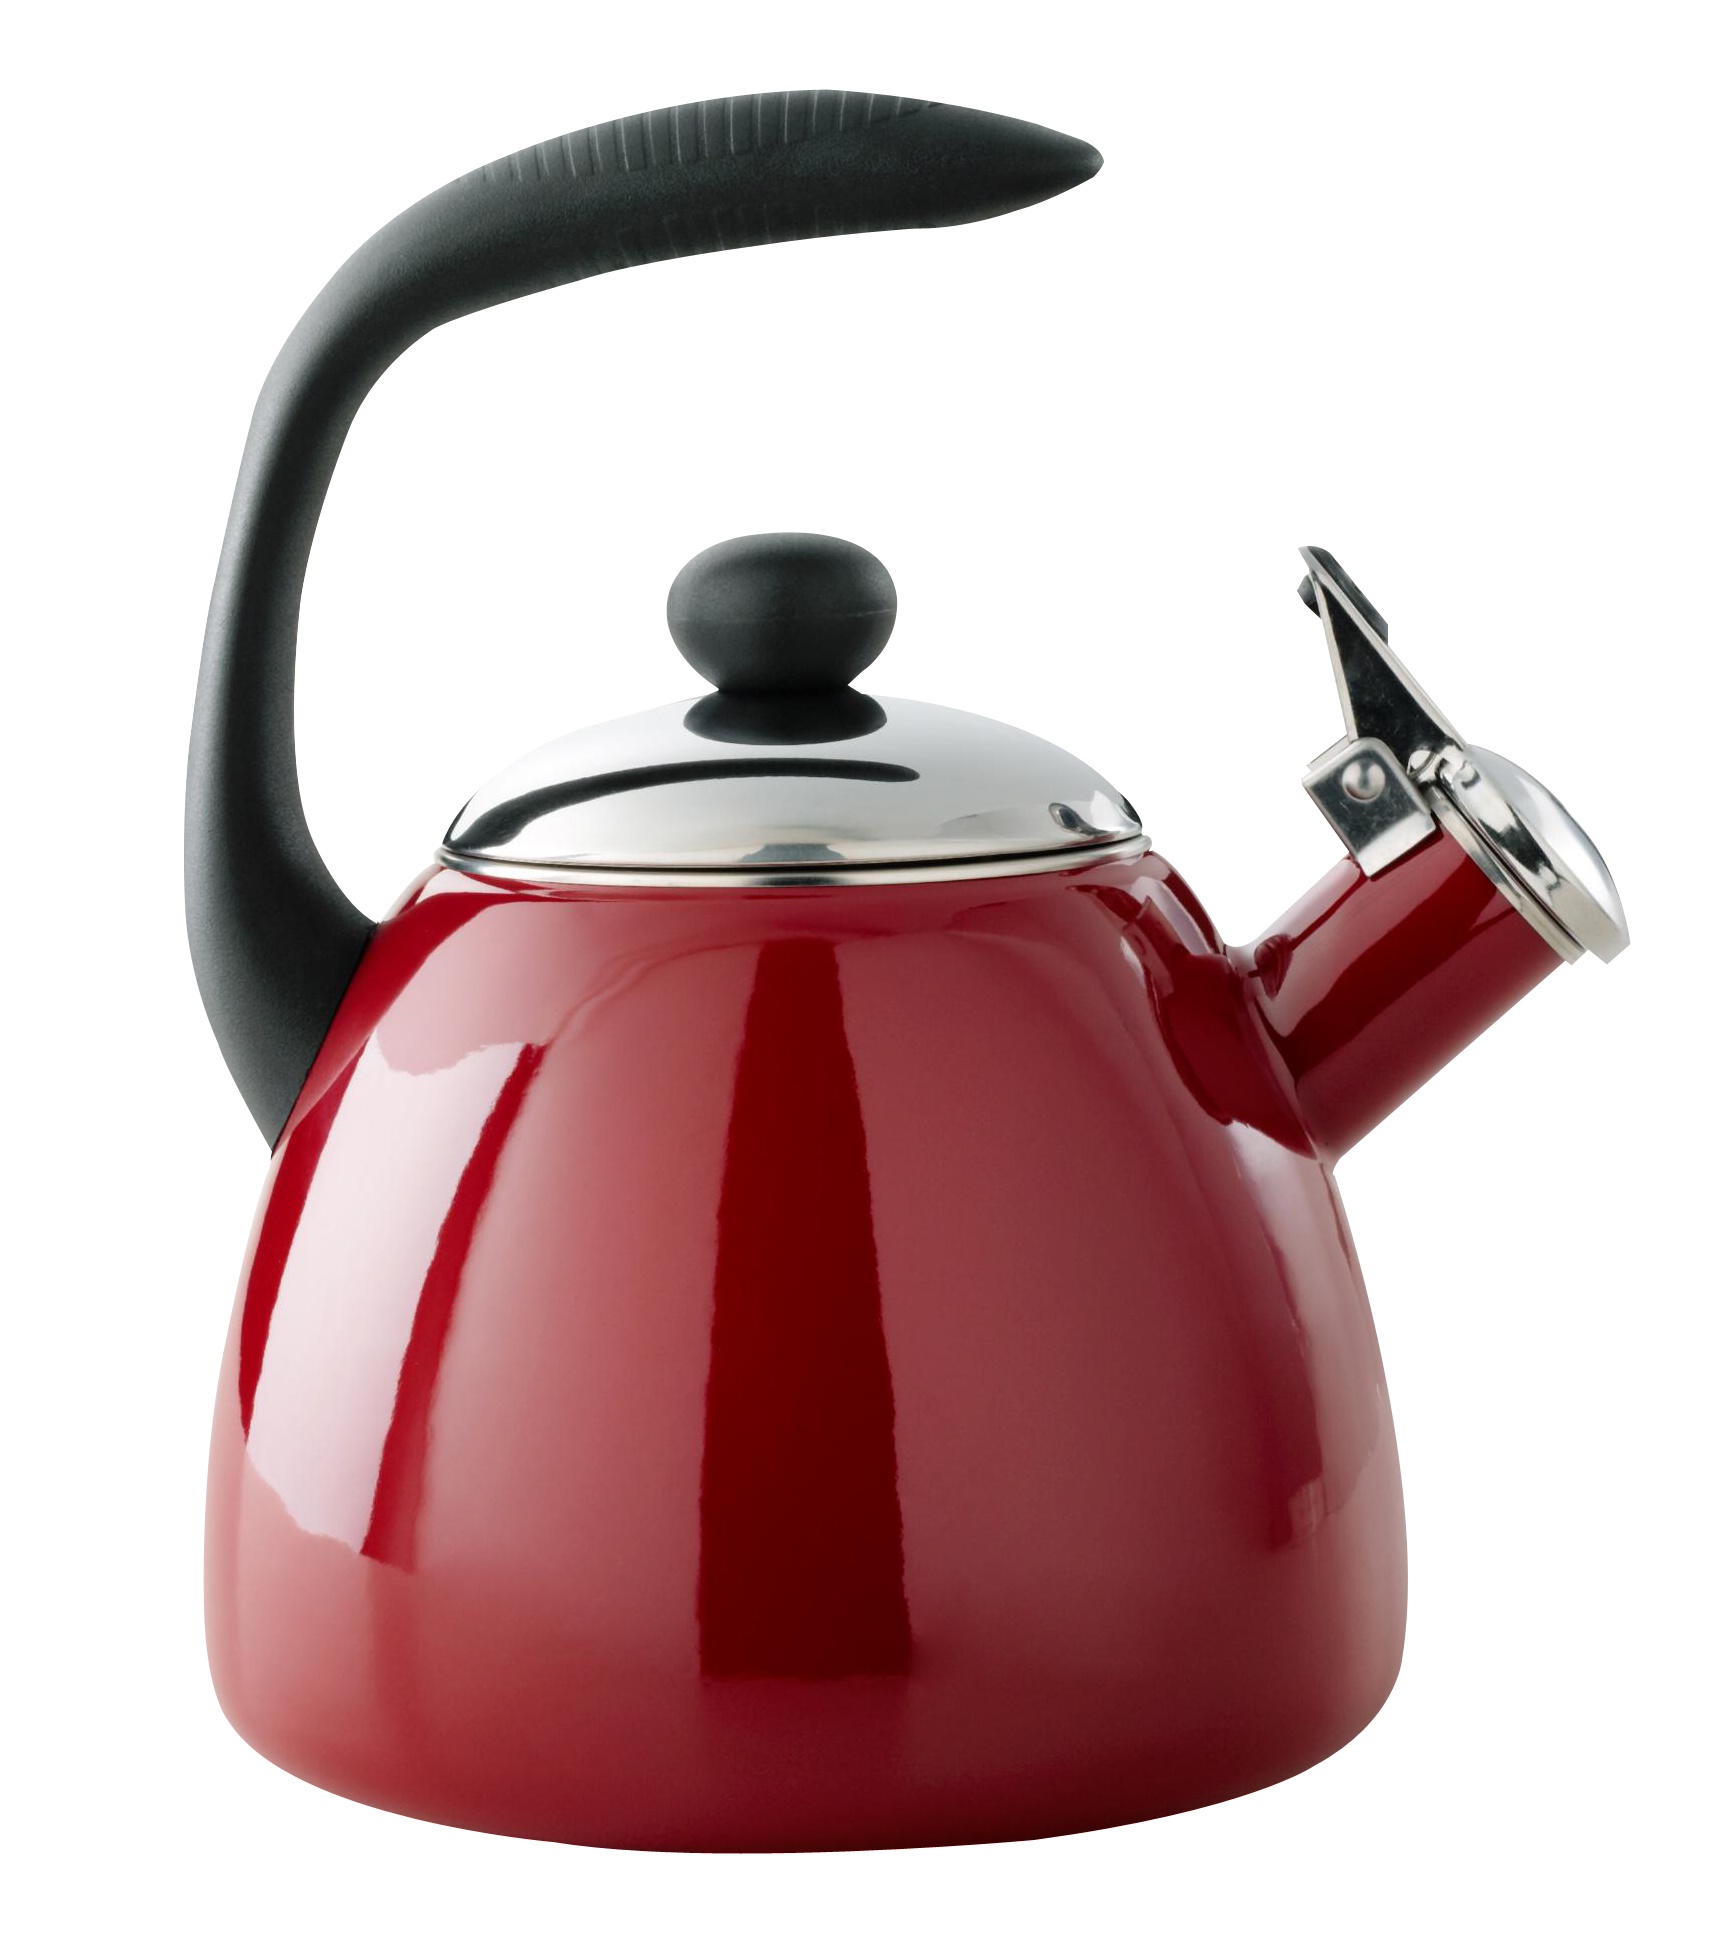 Kettle Download Free Image PNG Image